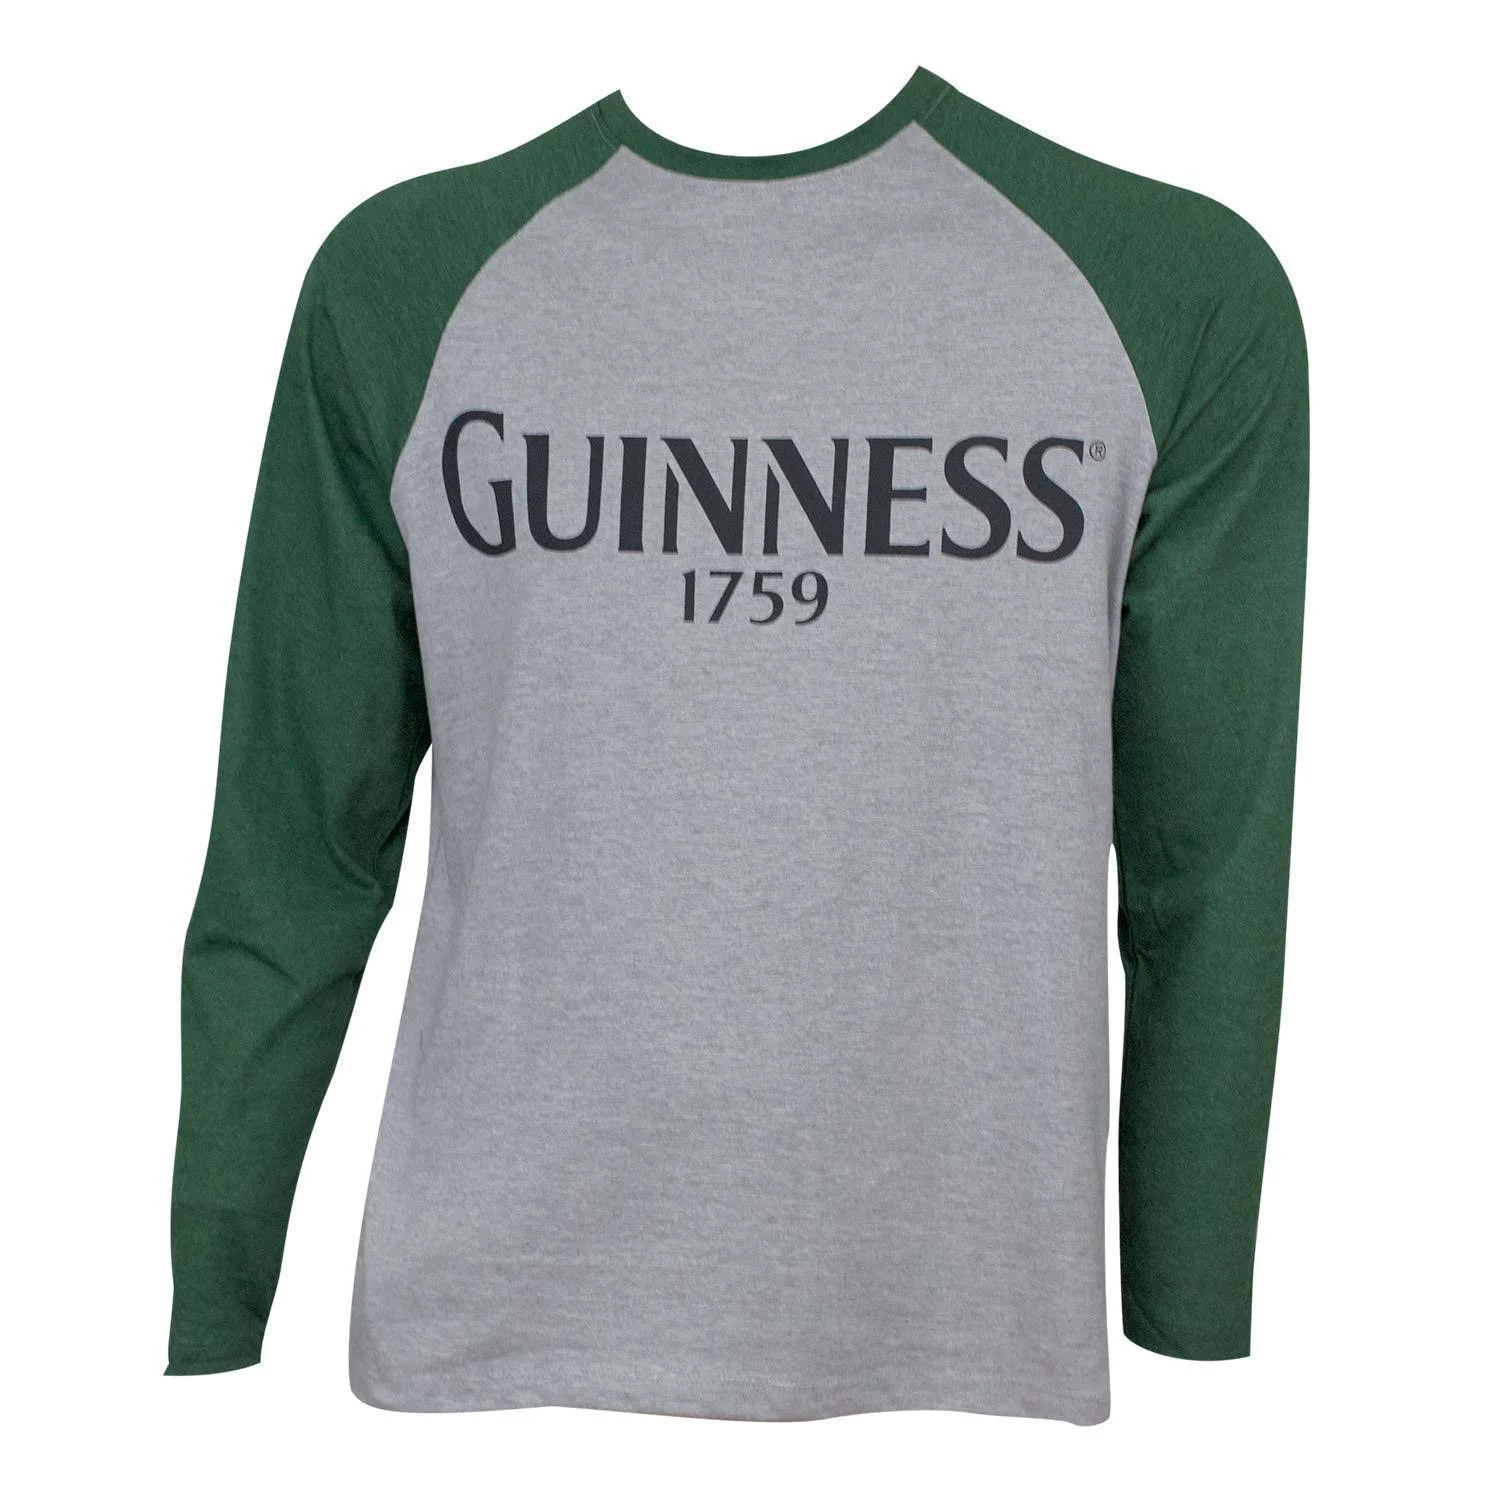 Mens Graphic Tees - Bangladesh Factory, Suppliers, Manufacturers